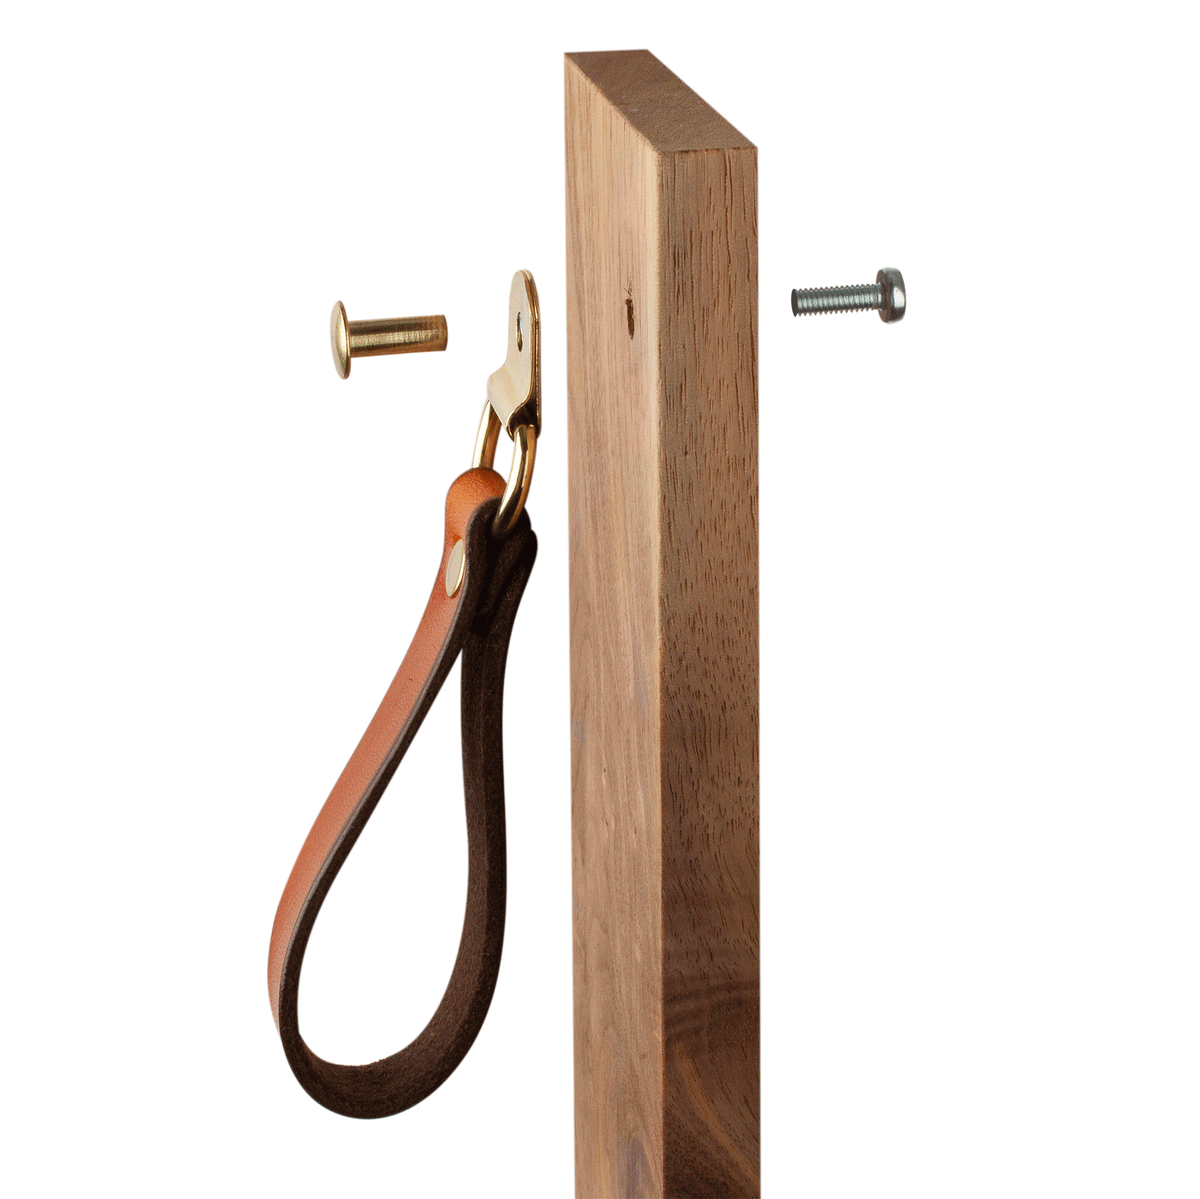 Animated GIF image of installing the hardware of the Burnside hinged leather handle with hardware, on a template wood cabinet door. The hardware uses a surfaceless head Chicago screw on the front side of the cabinet and a threaded back screw to secure it to the door. 